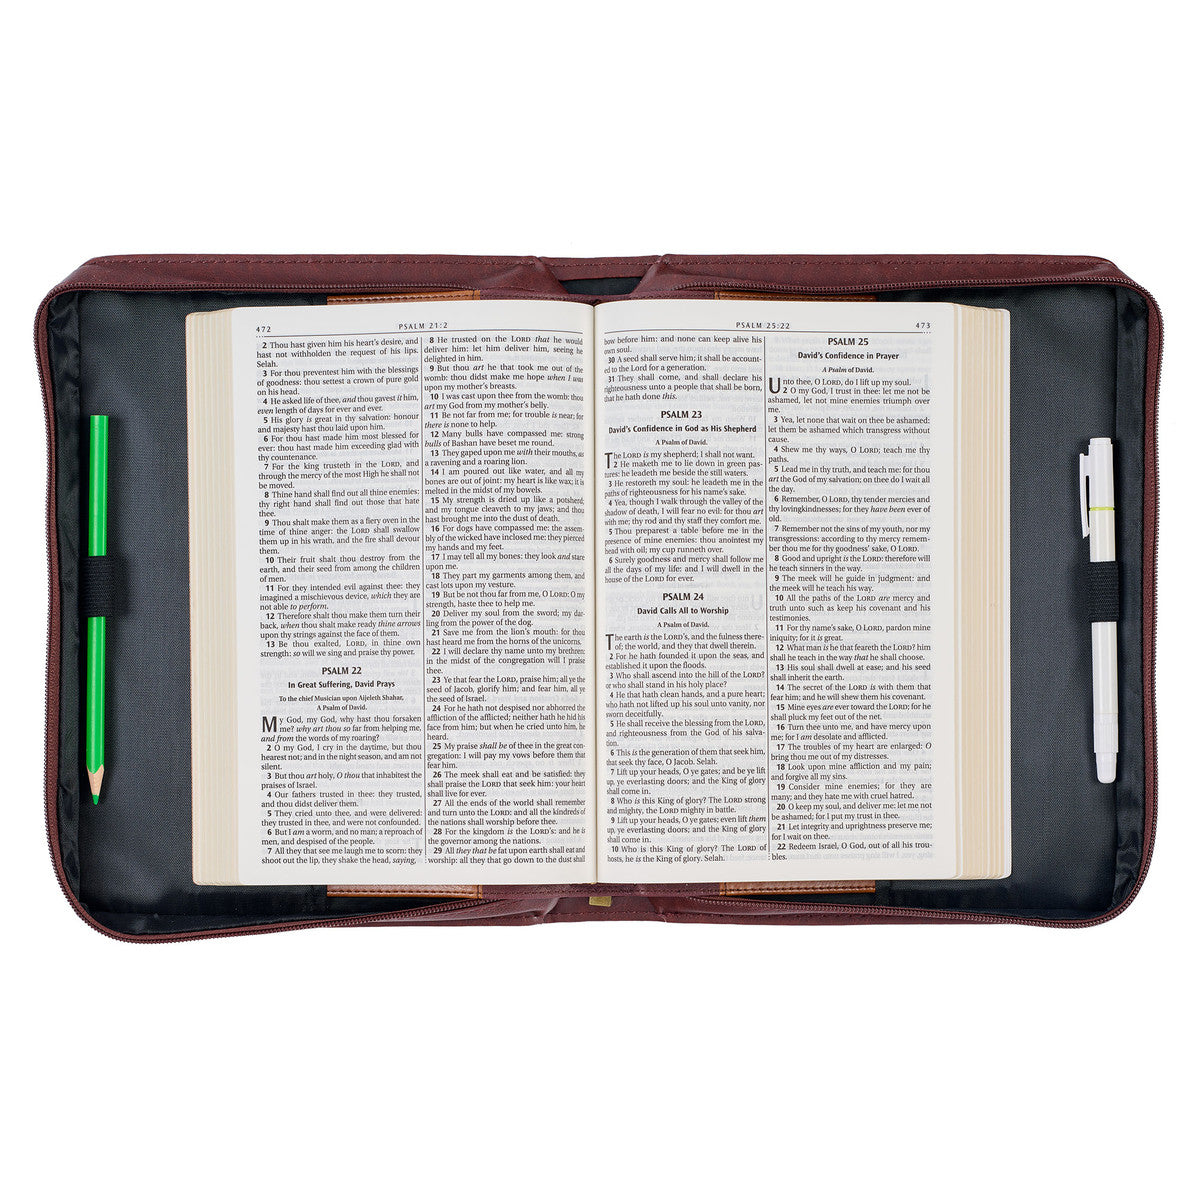 The LORD's Prayer Walnut and Burgundy Faux Leather Classic Bible Cover - Matthew 6: 9-13 - The Christian Gift Company